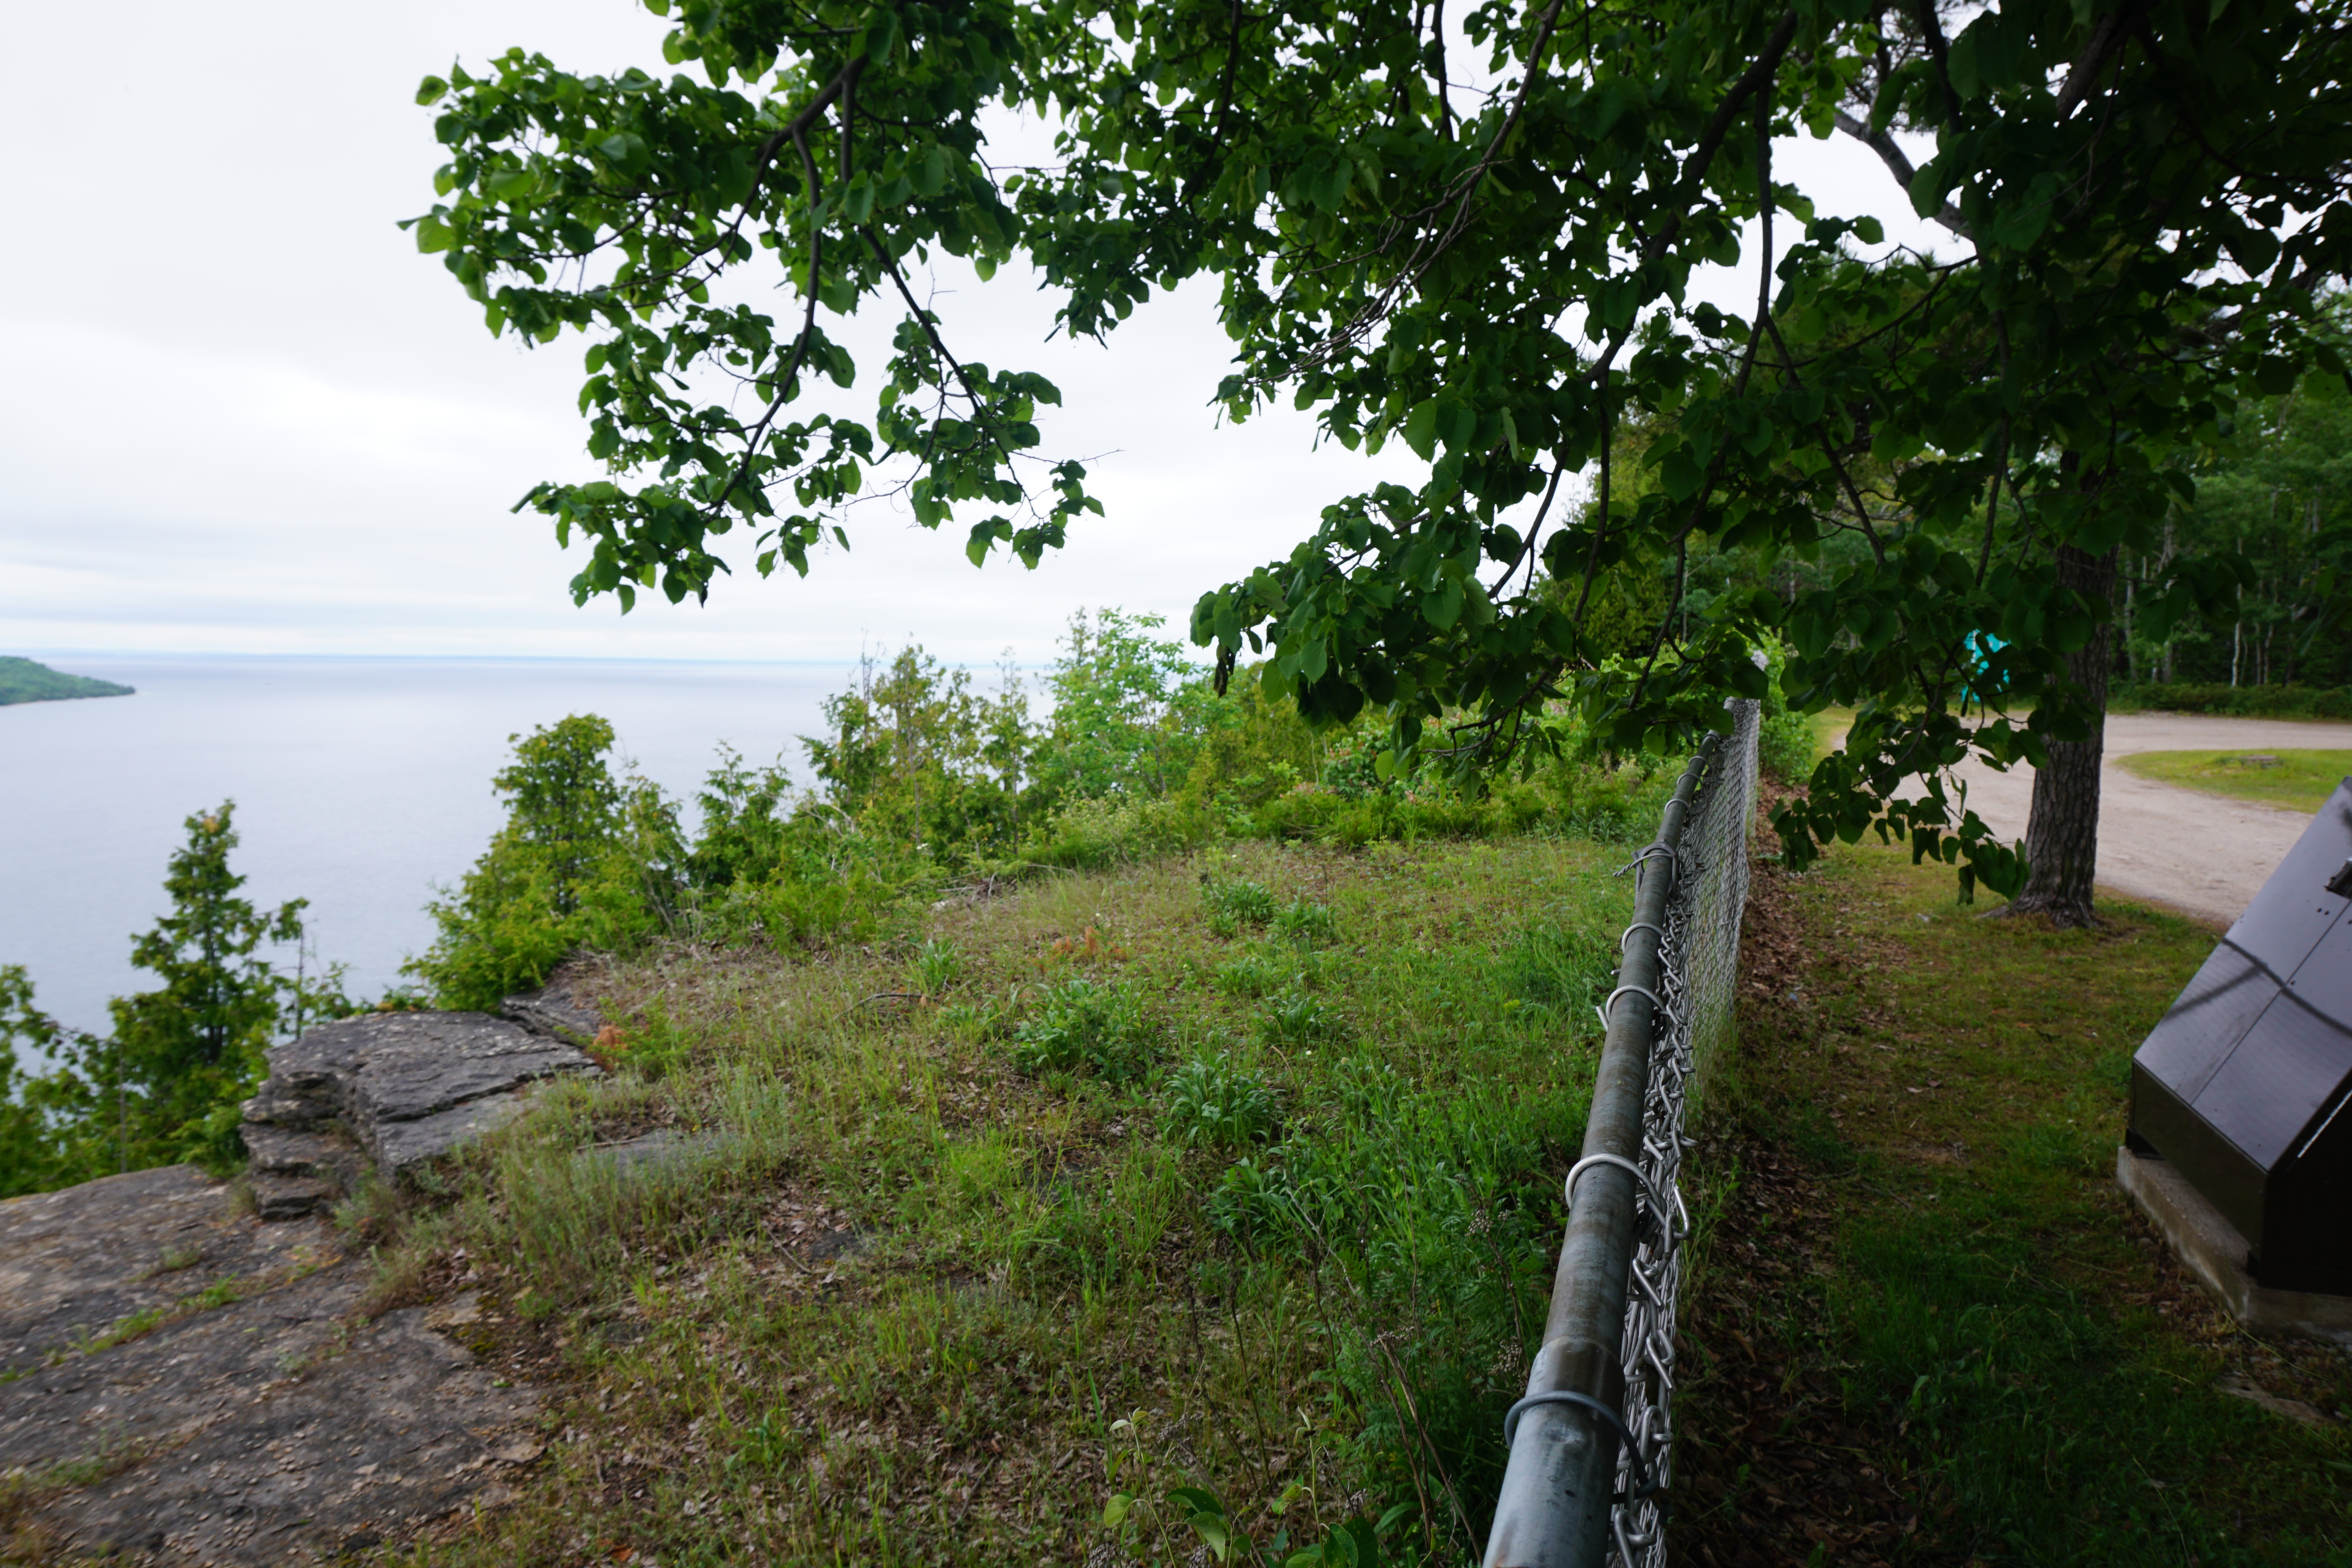 East Bluff Lookout; a green rocky embankment next to a treed walkway, overlooking the broad Gore Bay.